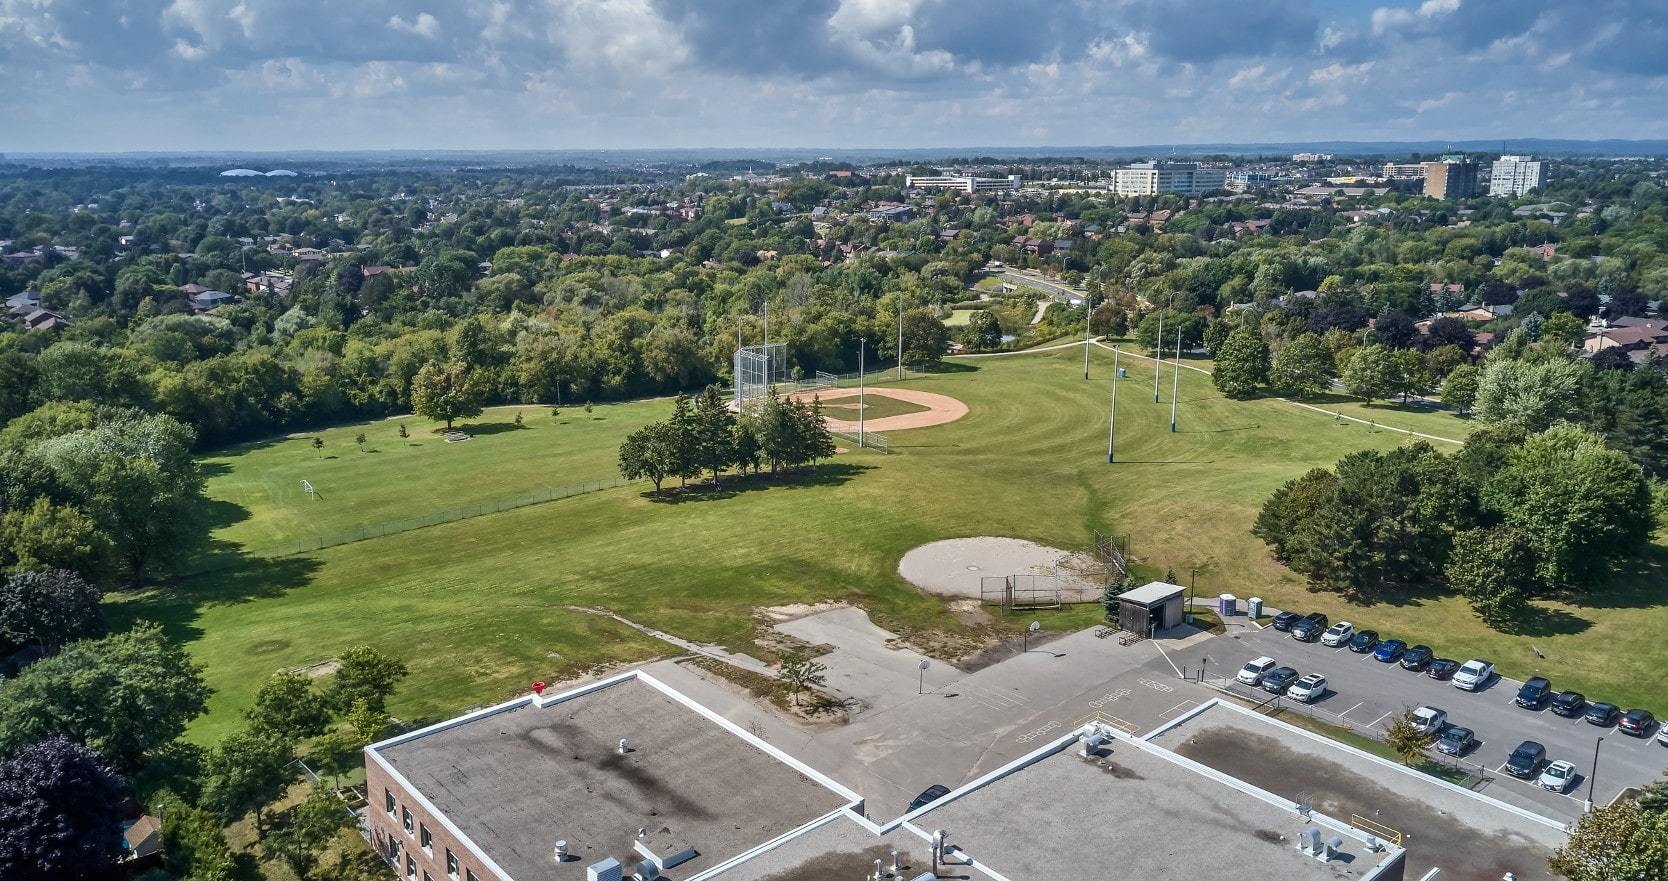 Aerial view of green field in a park surrounded by real estate in Whitby, Ontario